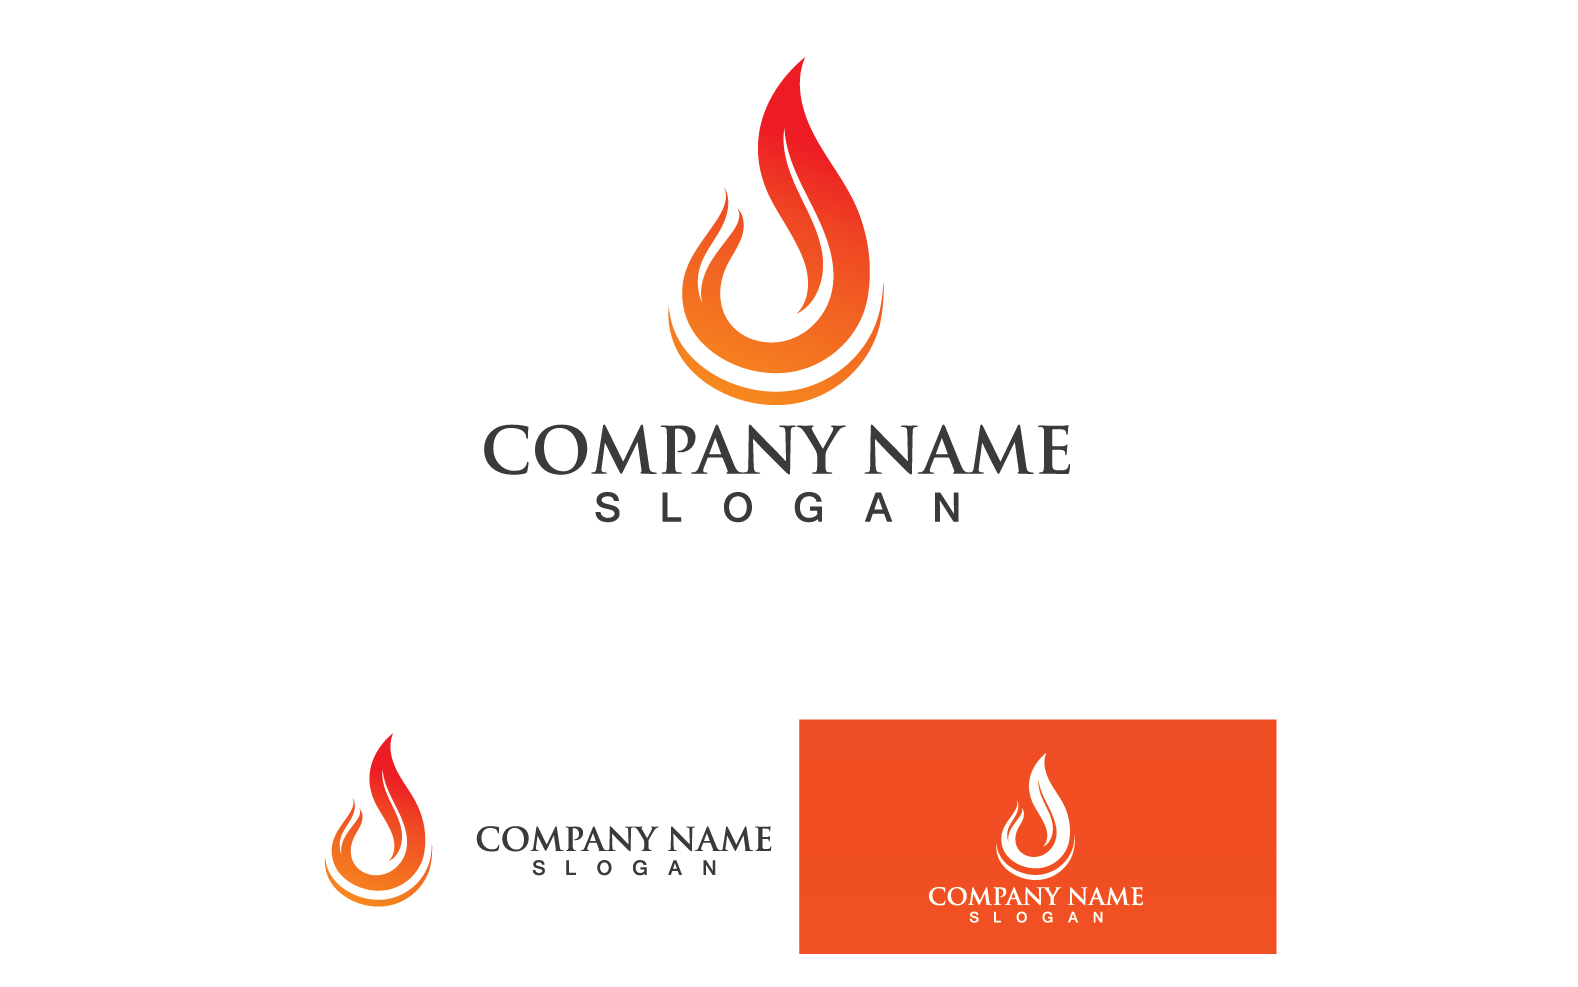 Wing Bird Business Logo Your Company Name V15